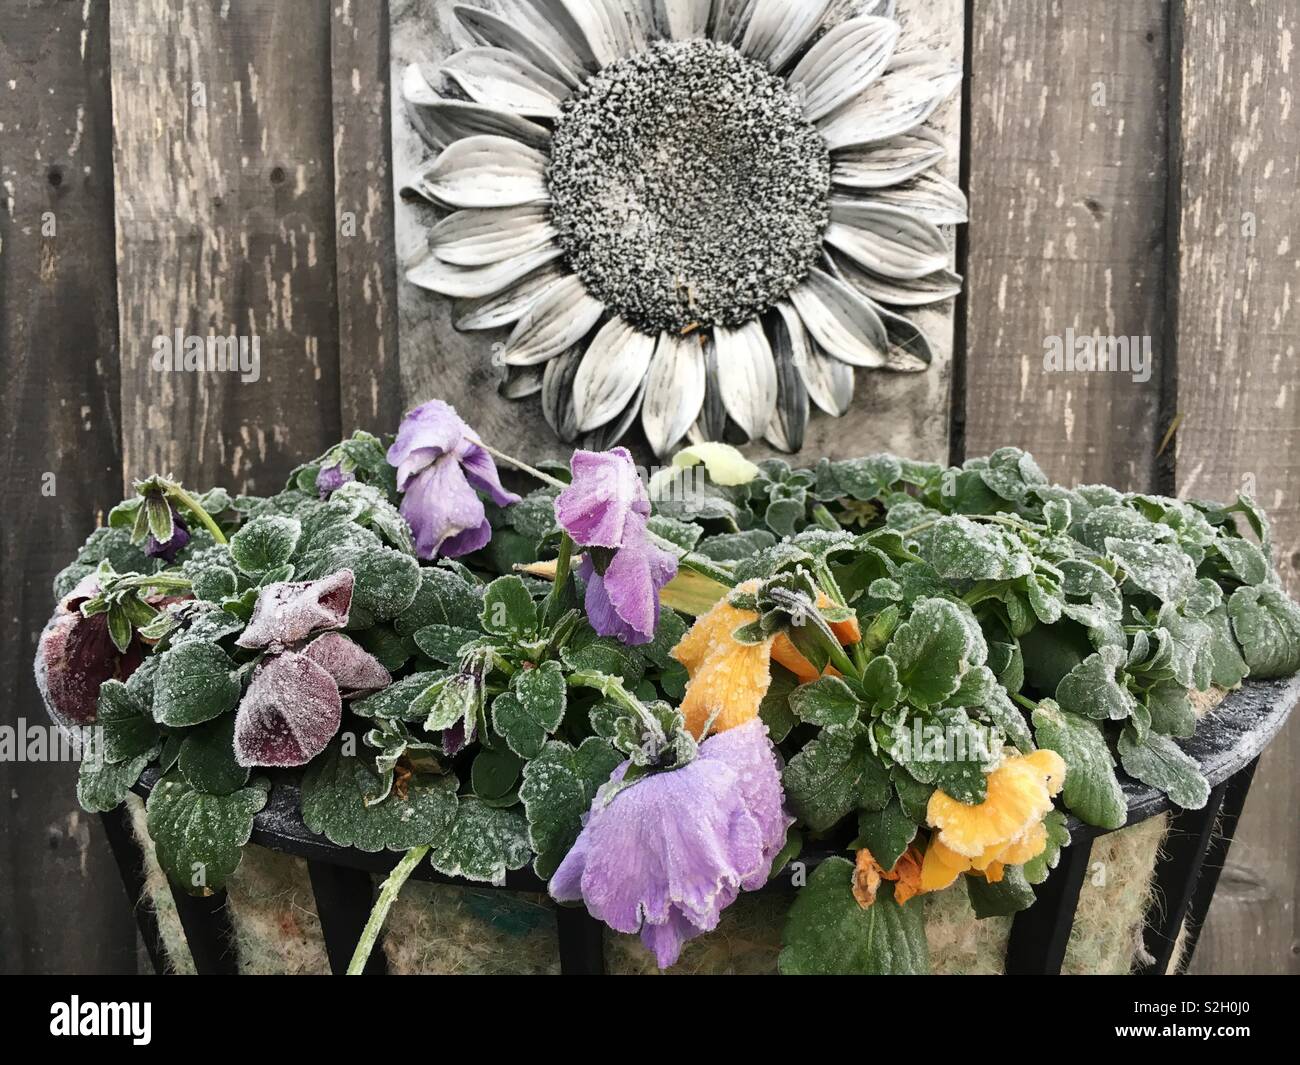 Frozen pansy flowers covered in frost in sub zero temperatures Stock Photo